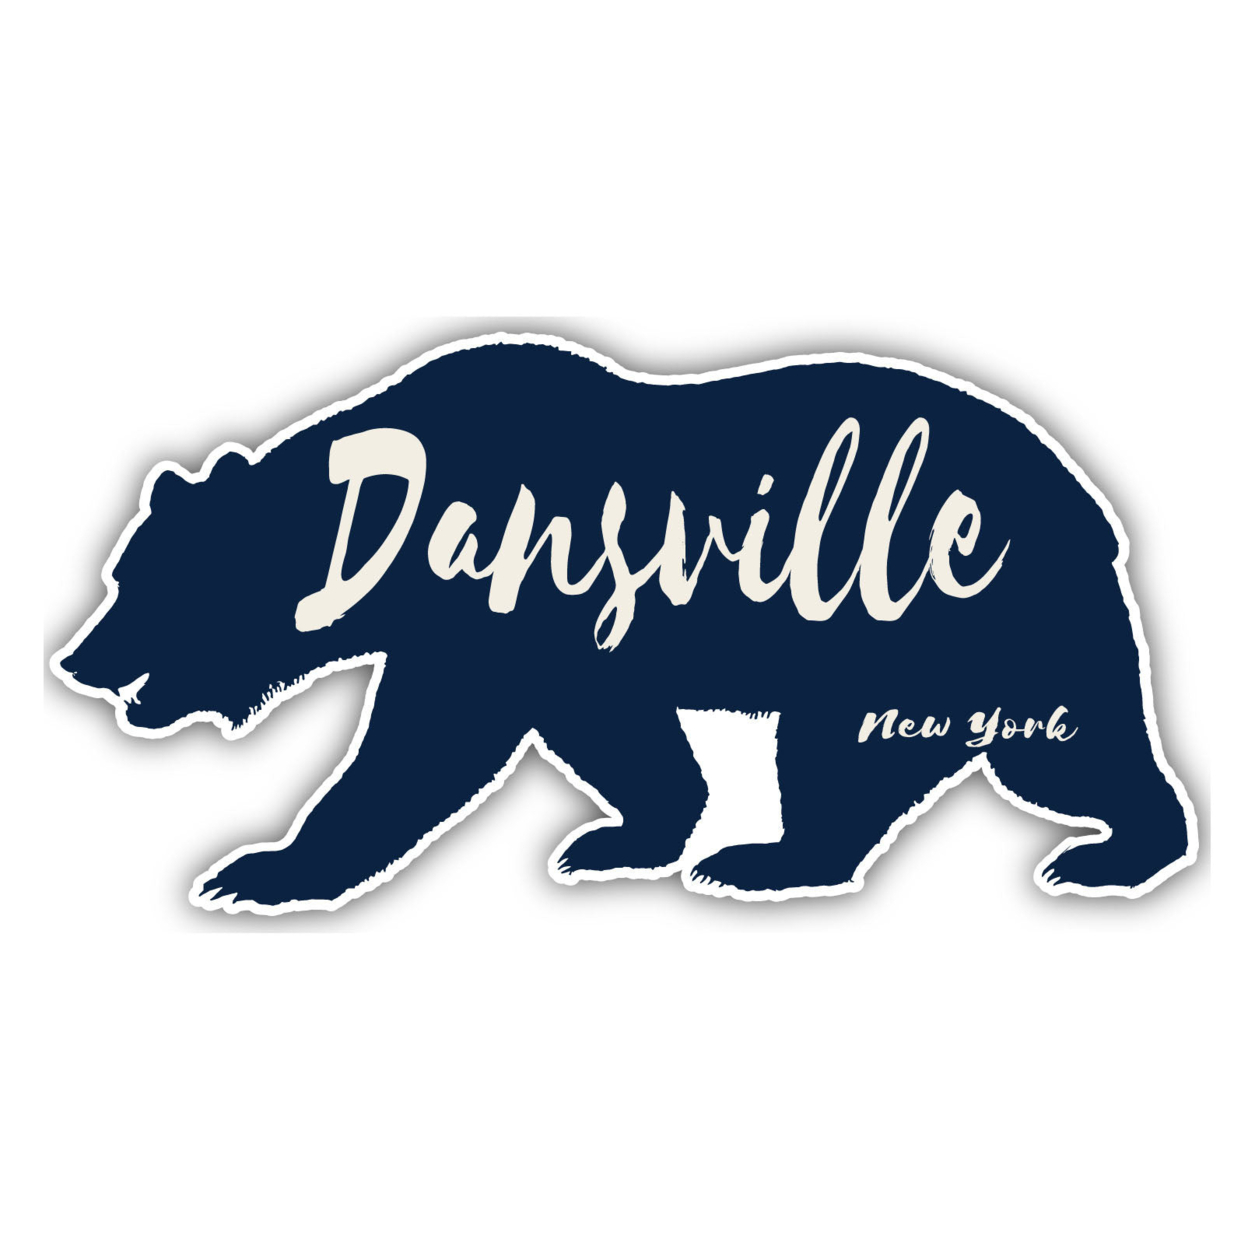 Dansville New York Souvenir Decorative Stickers (Choose Theme And Size) - 4-Pack, 10-Inch, Bear